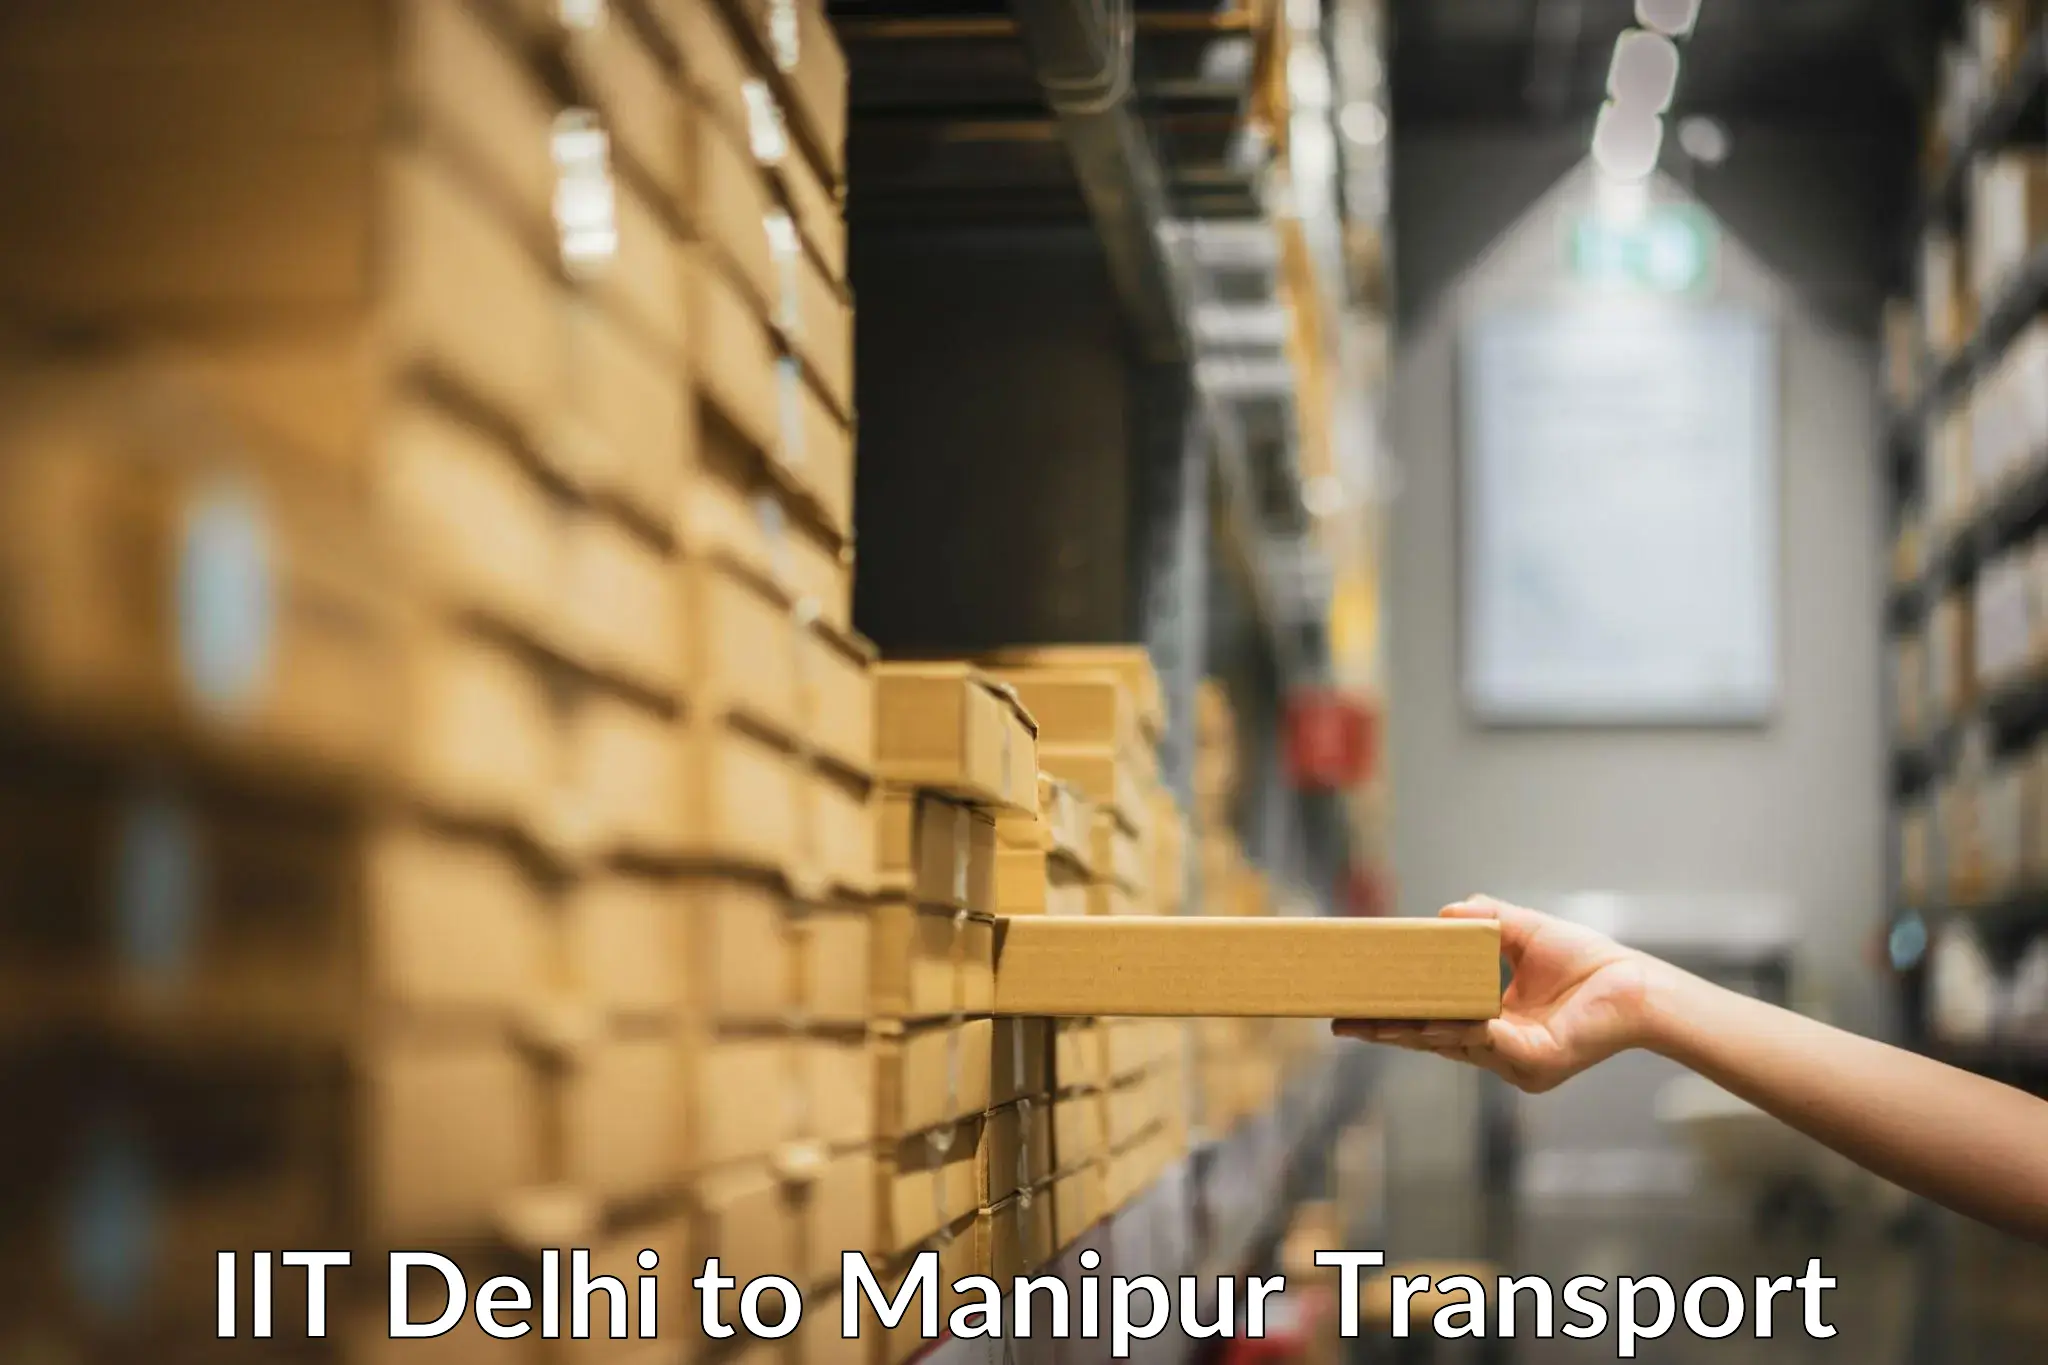 Commercial transport service IIT Delhi to Manipur